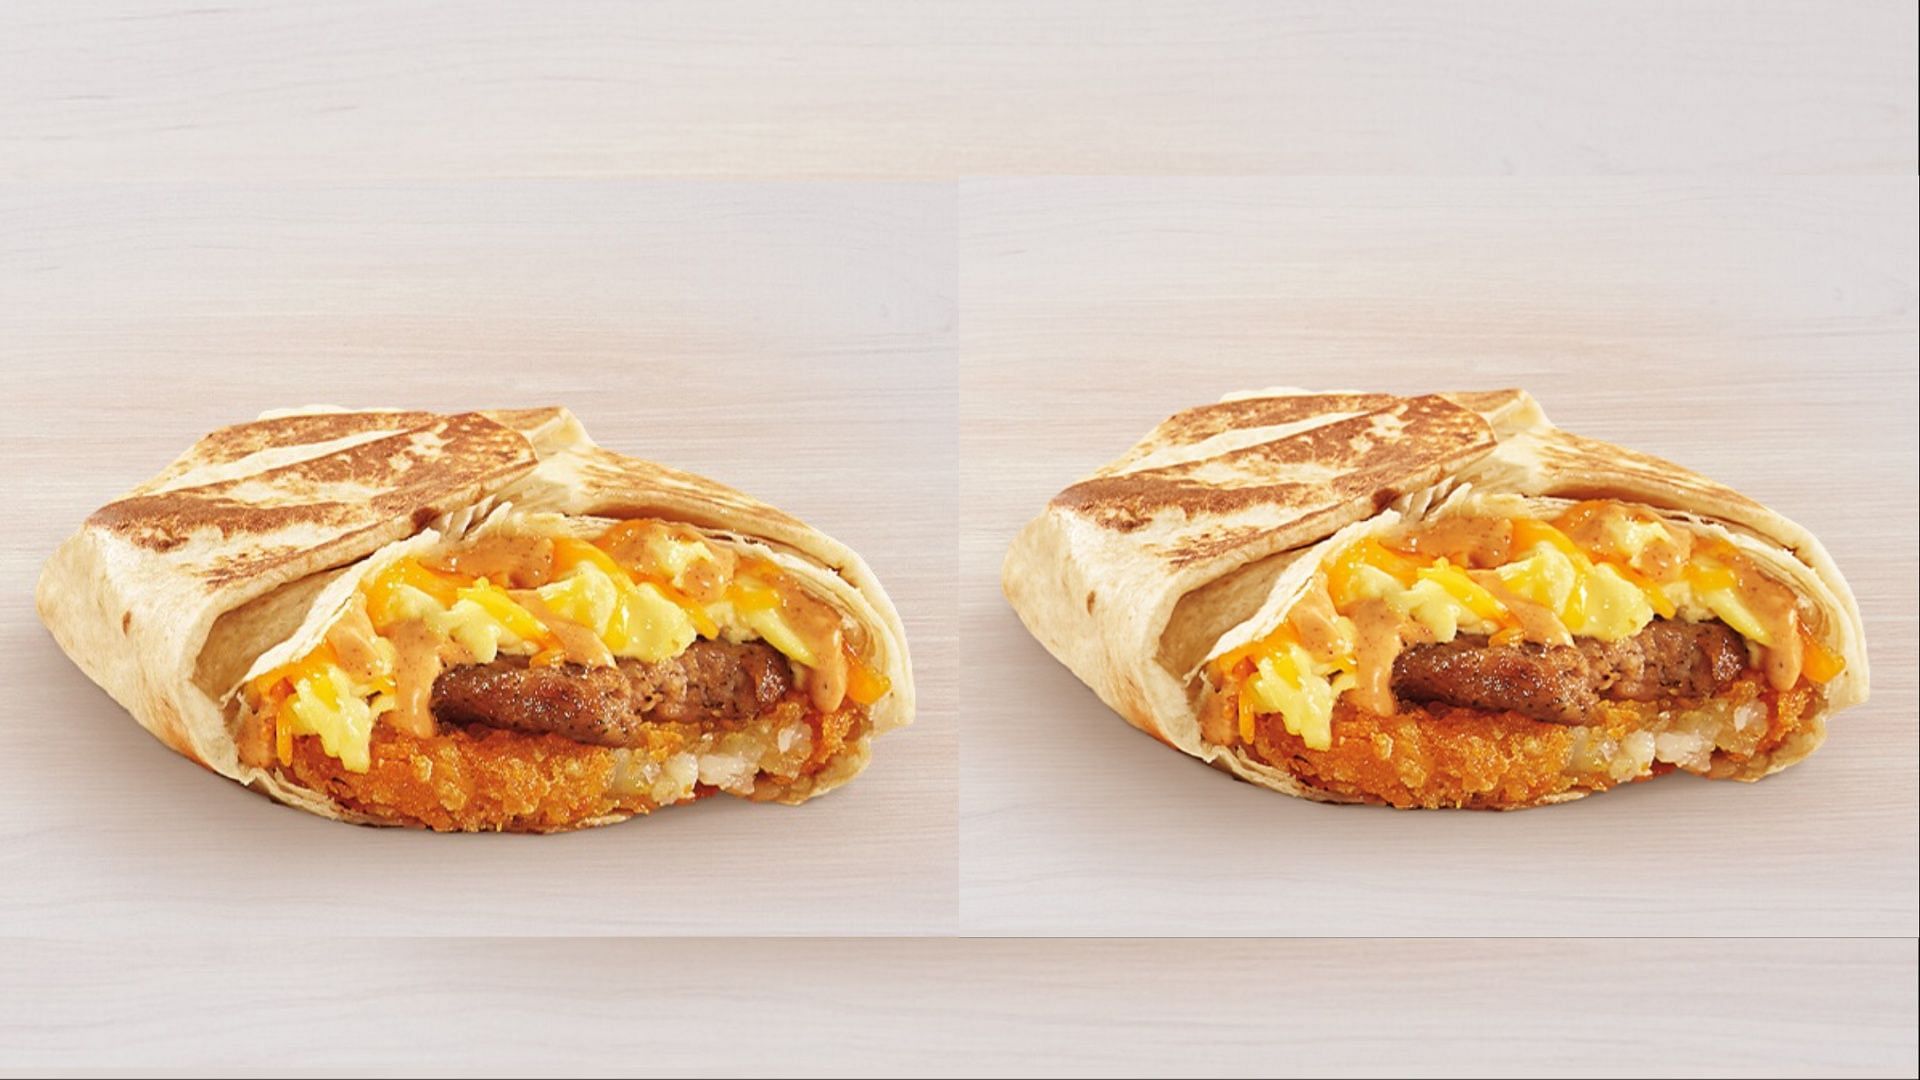 All reward program members can snag a free Breakfast Crunchwrap either with bacon or sausage every Tuesday in June (Image via Taco Bell)